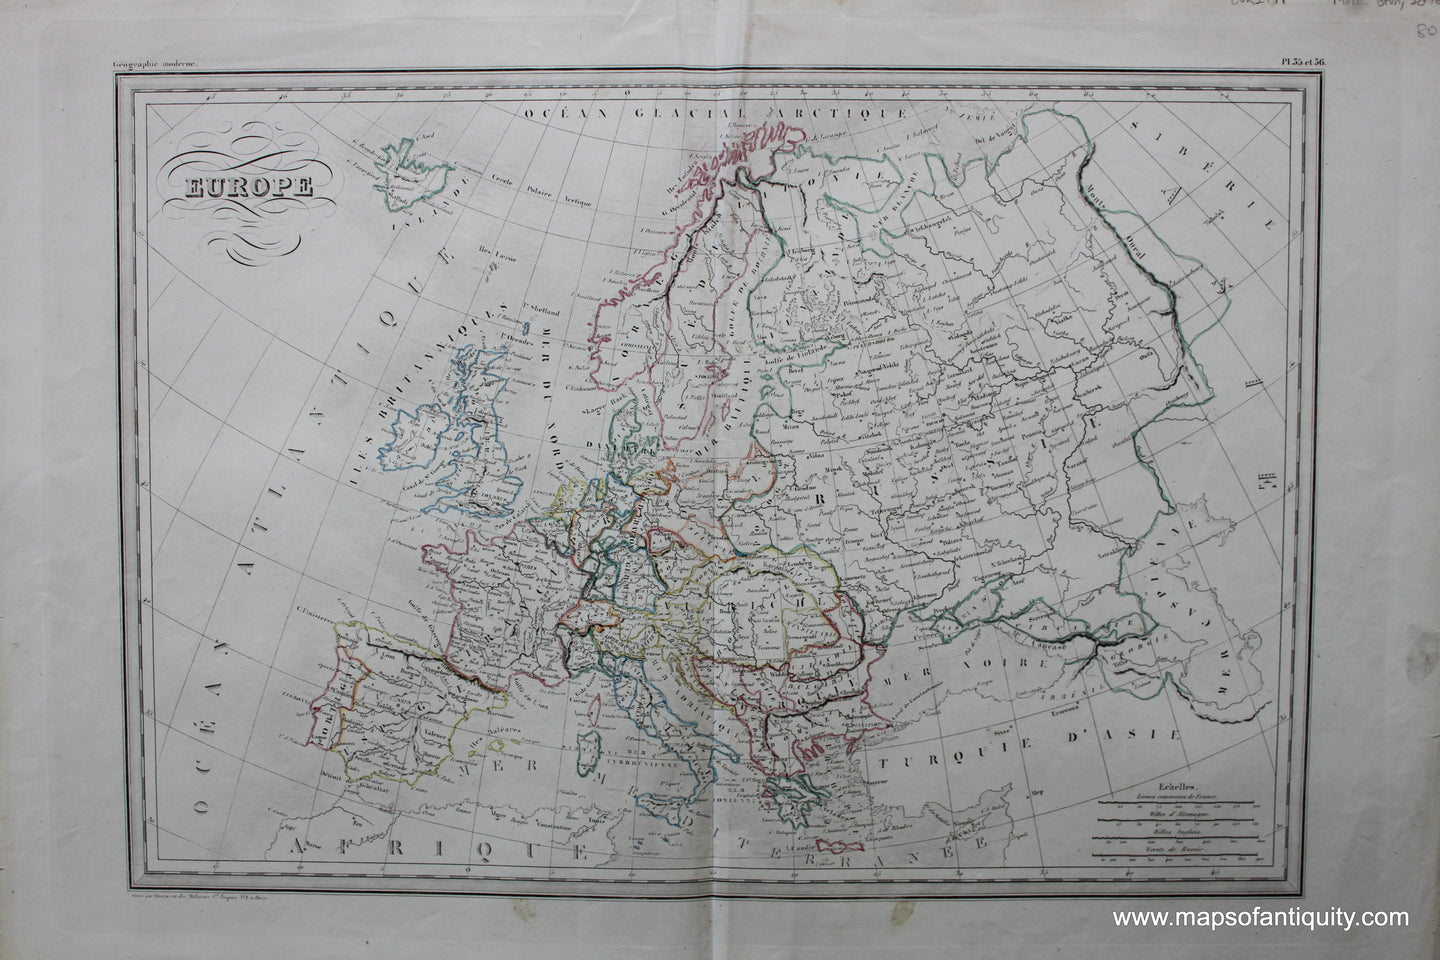 Antique-Hand-Colored-Map-Europe-Europe-Europe-General-1846-M.-Malte-Brun-Maps-Of-Antiquity